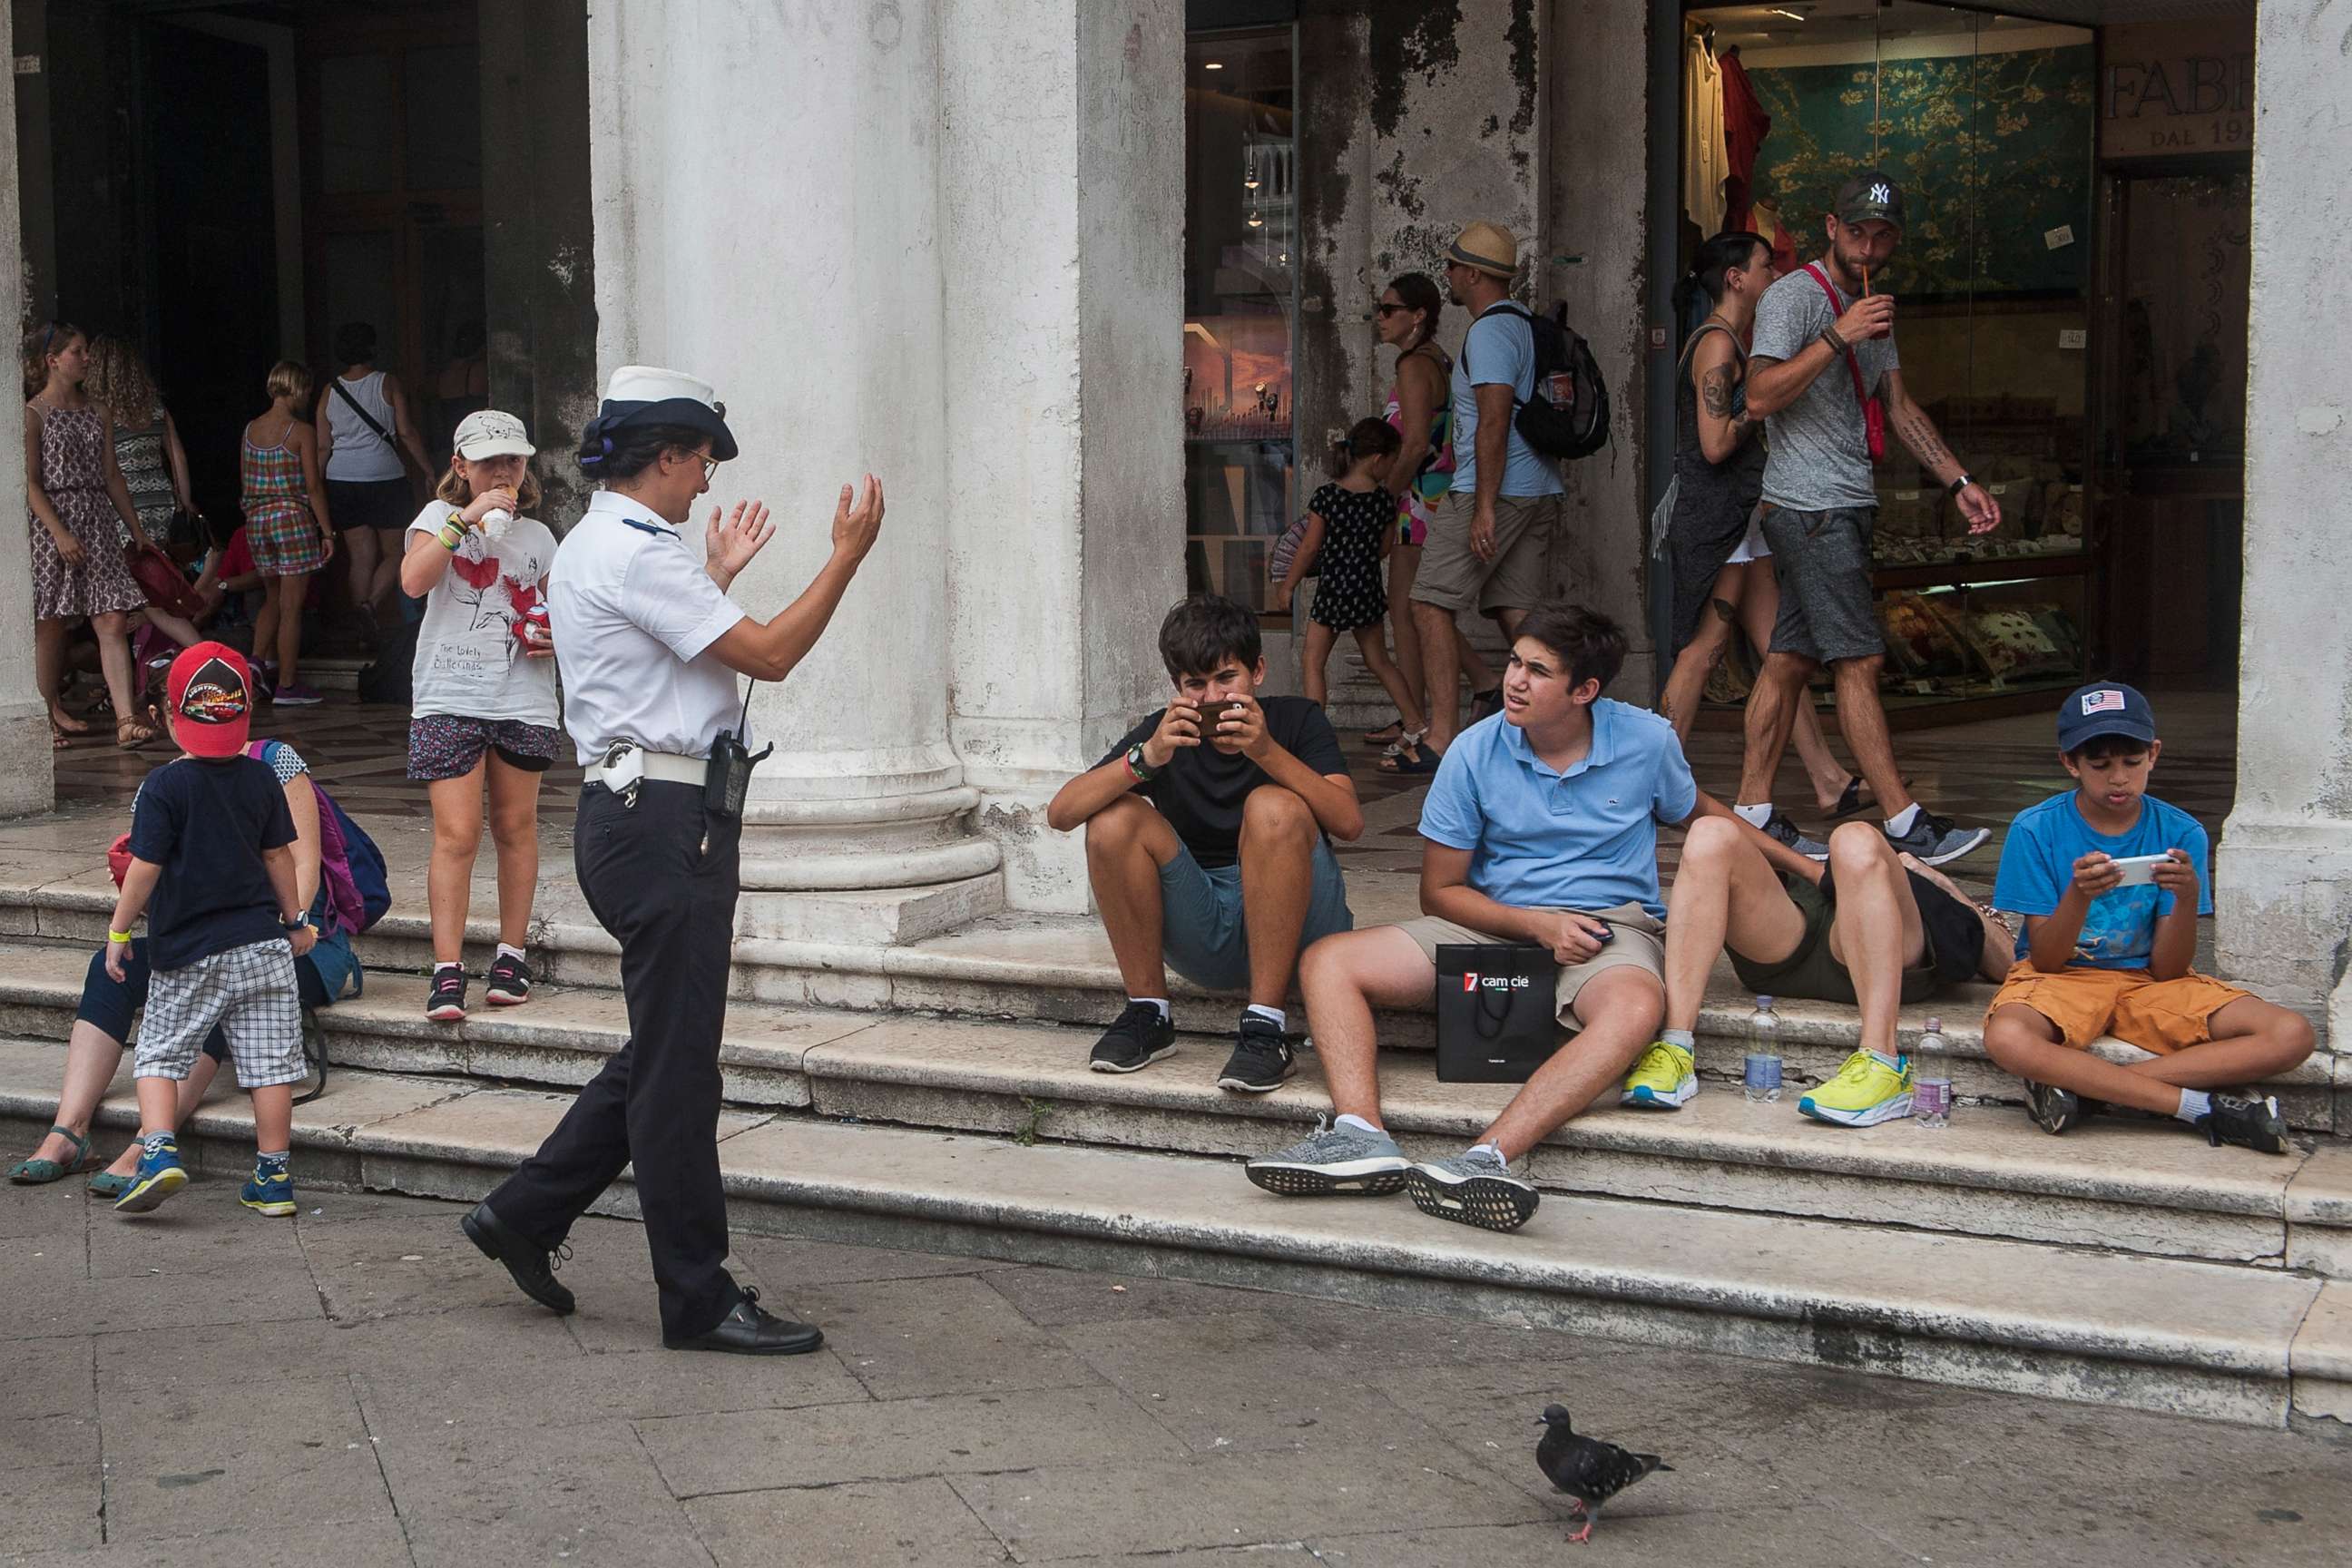 PHOTO: A local police officer tells tourists to move away from Saint Mark's Square on Aug. 14, 2017 in Venice, Italy.